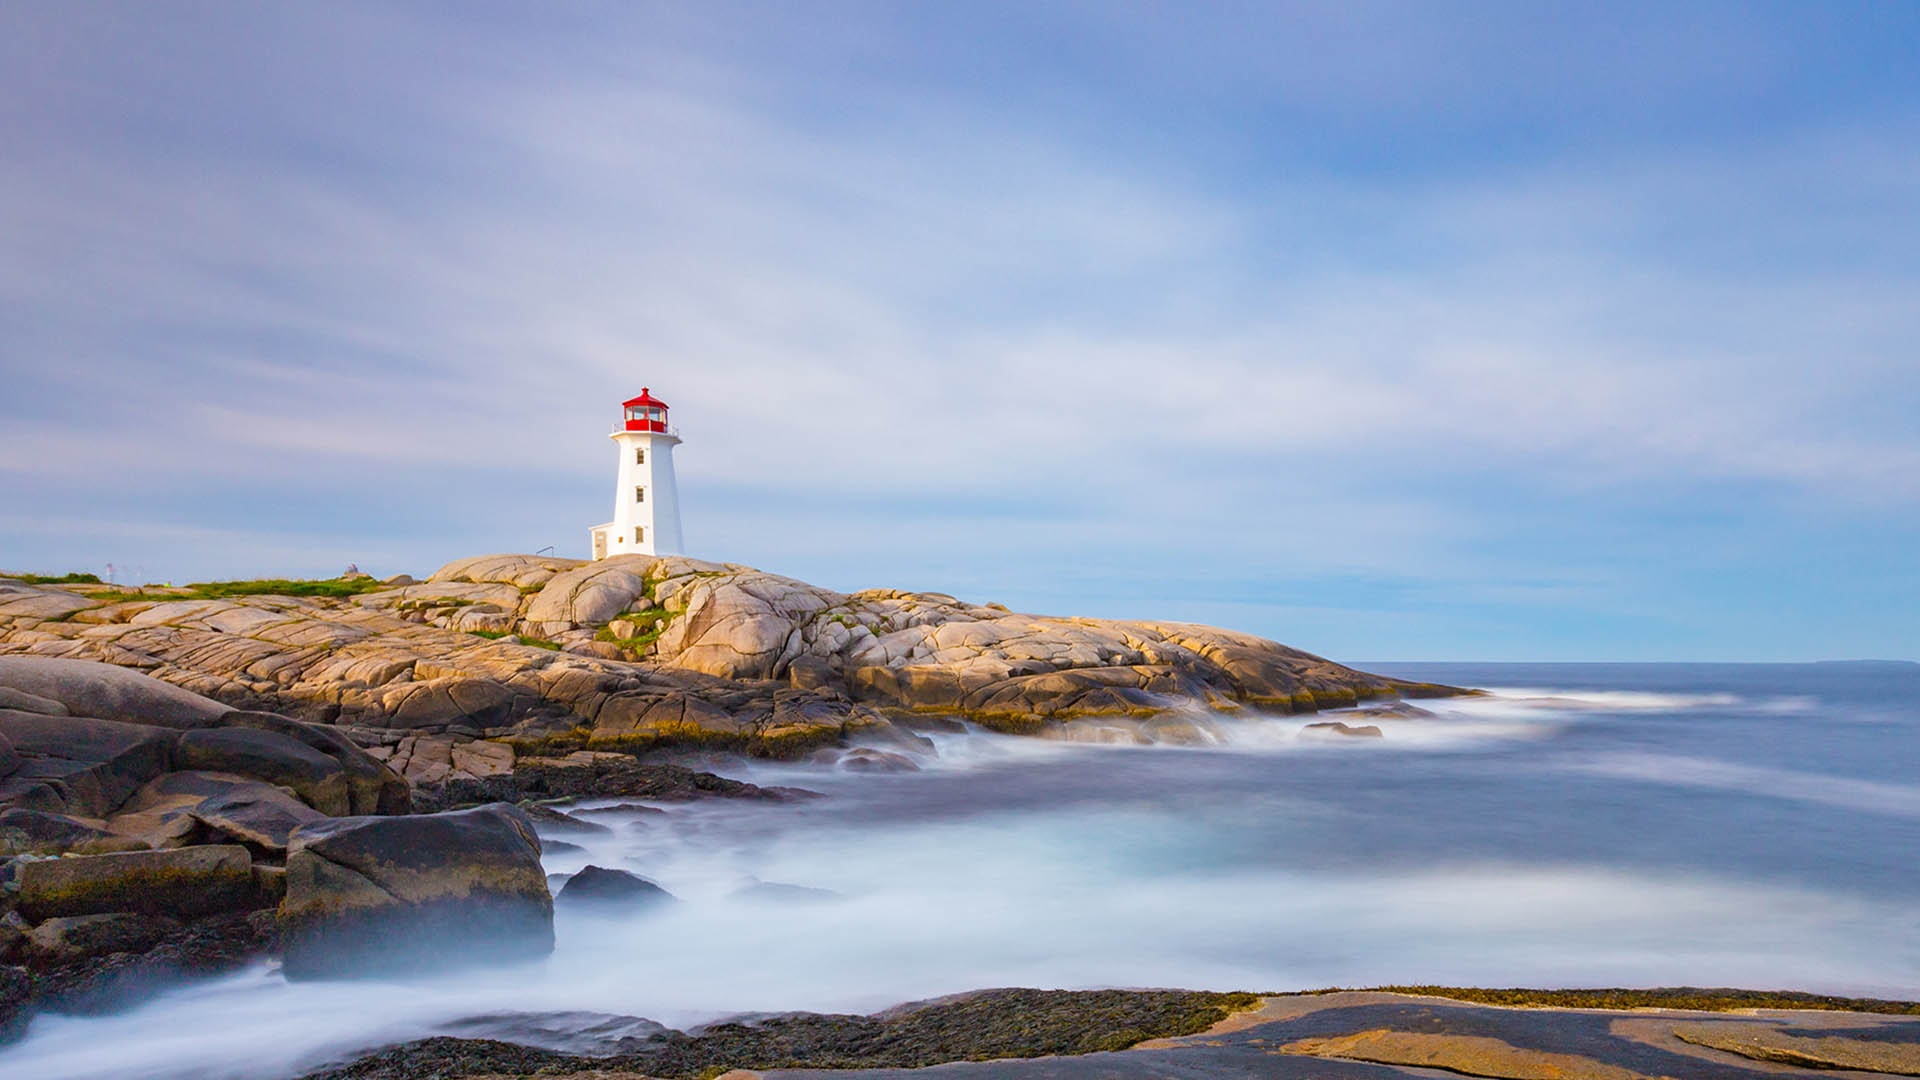 Jewish National Fund of Canada | We are the regional office of JNF Canada for Eastern Canada from Torngat Mountain National Park, Newfoundland and Labrador to Yarmouth, Nova Scotia. We look for